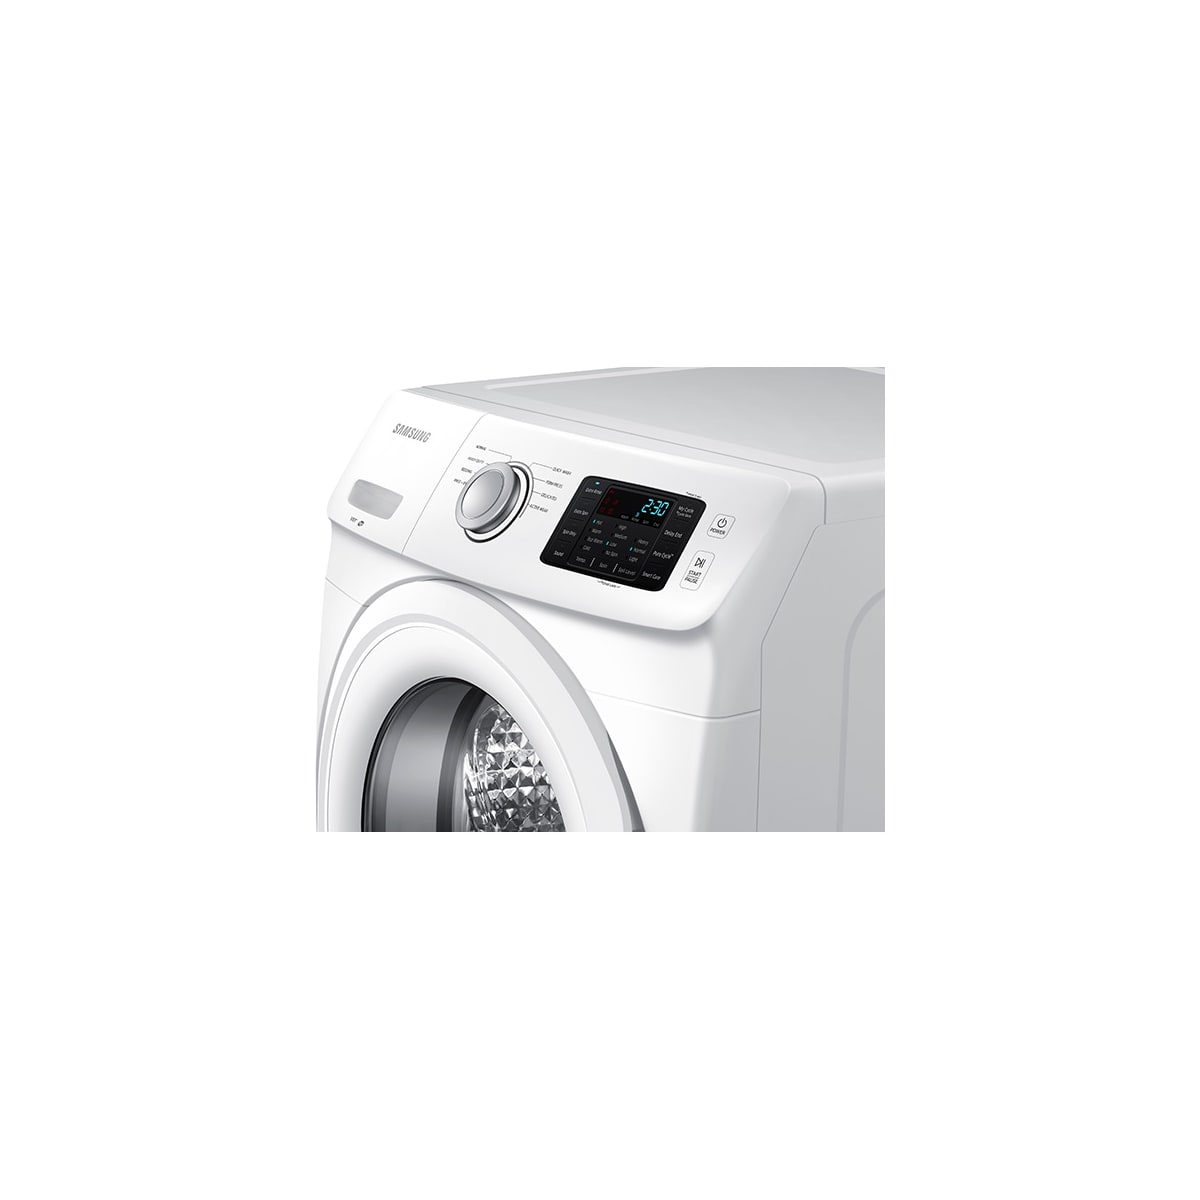 WF42H5000AW by Samsung - Samsung Washer On Special In Los Angeles, 4.2 cu.  ft. Front Load Washer in White. Model #WF42H5000AW